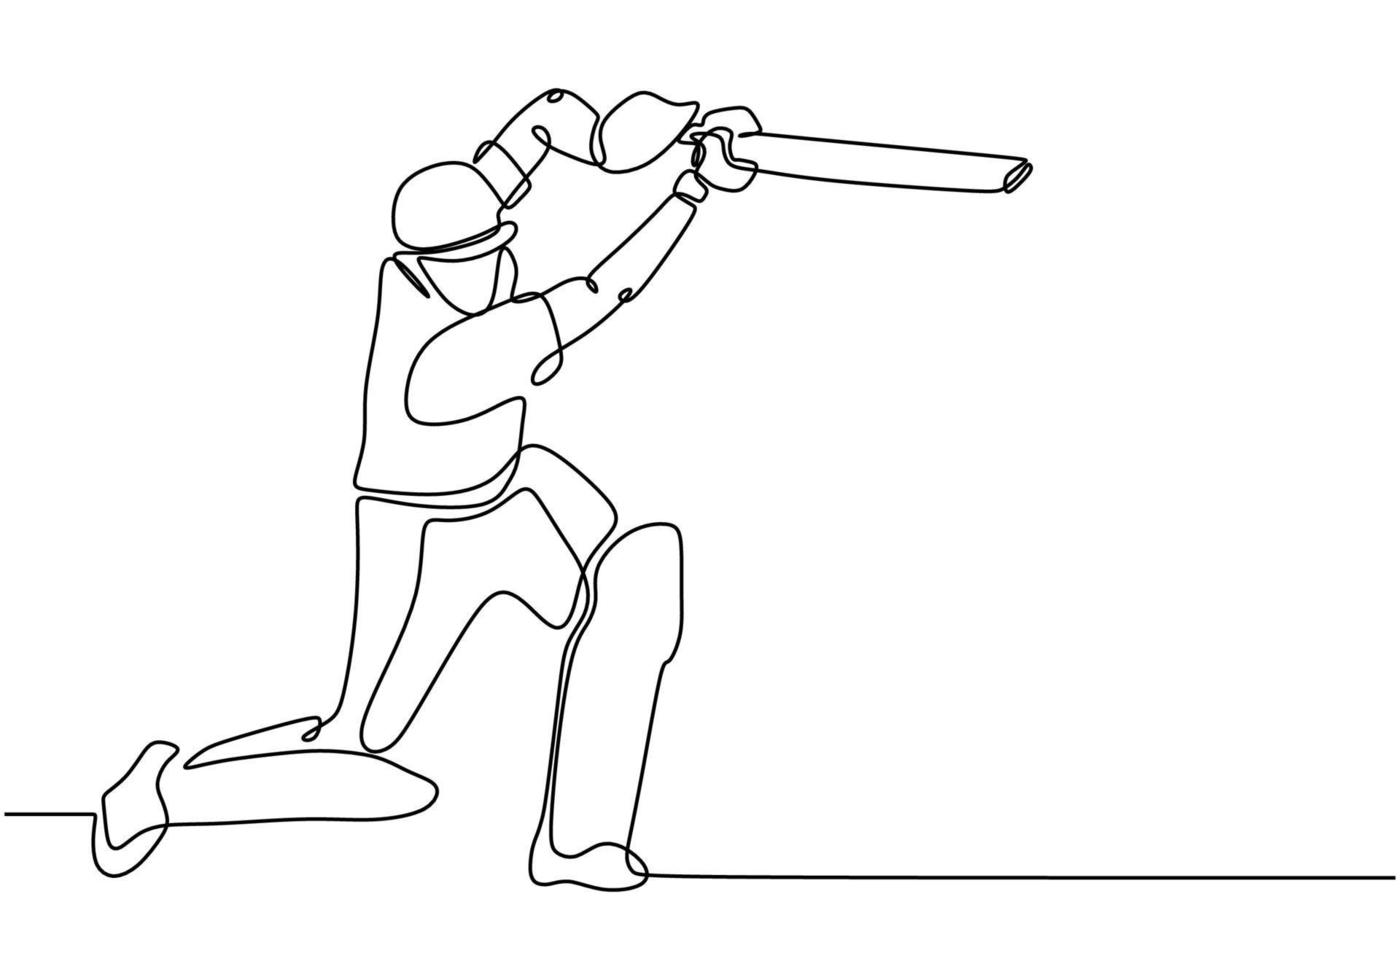 one line drawing of Cricket sport player continuous single line art vector